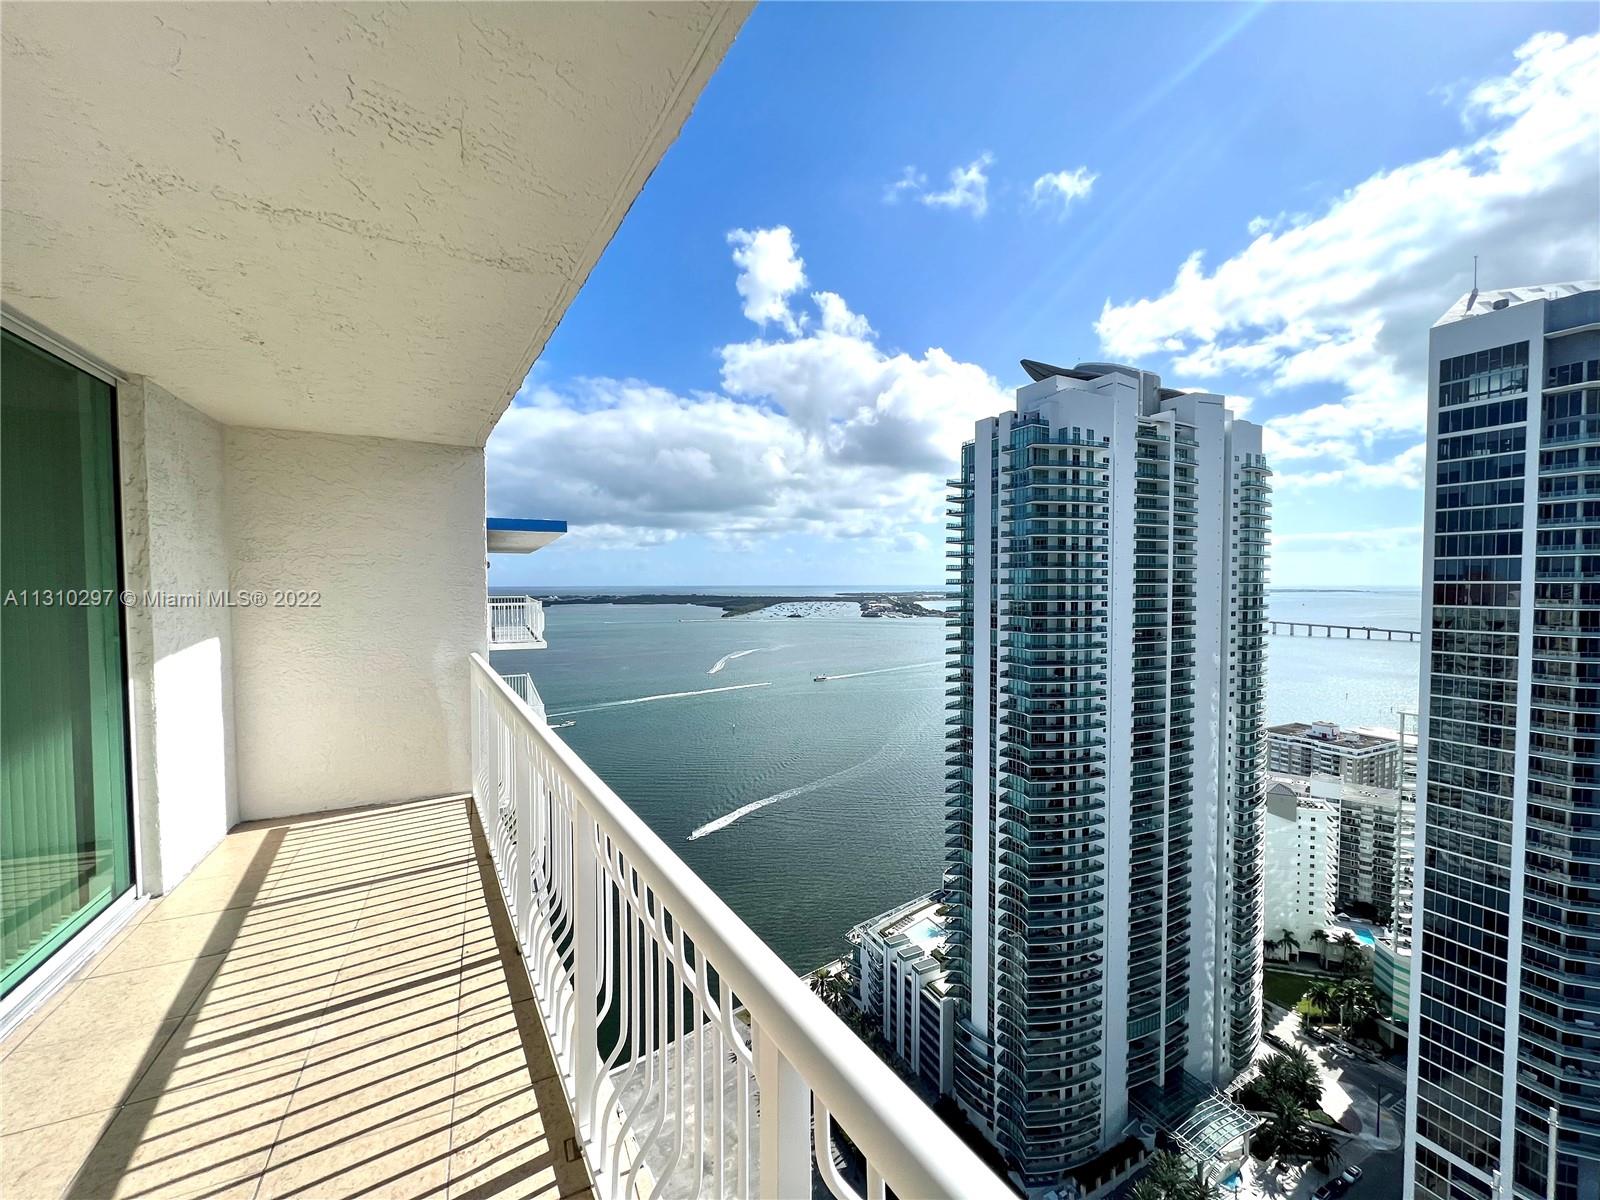 Spectacular  views from this updated 1/1 in sought after Brickell bay neighborhood.  Steps to the heart of Brickell with views of the city, and the bay. Large balcony with endless views. Tile floors through out. Can be sold furnished.  Great investment Short term rental allowed